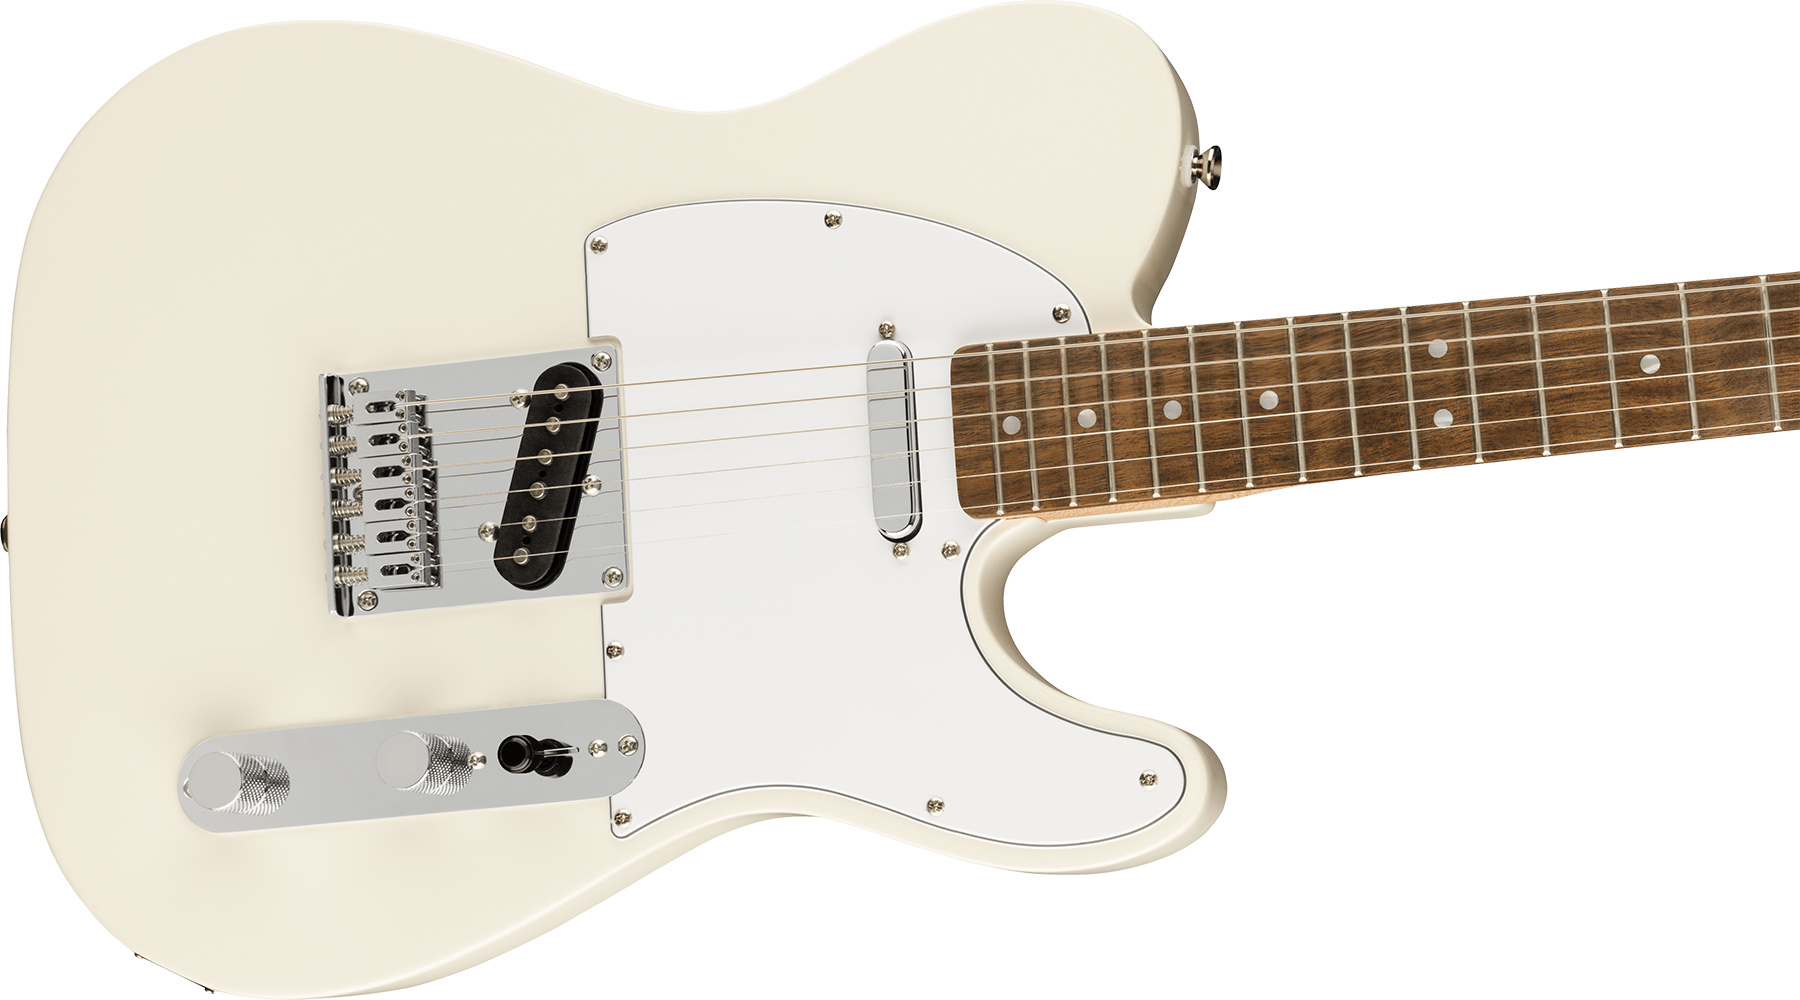 Squier Tele Affinity 2021 2s Lau - Olympic White - Tel shape electric guitar - Variation 2